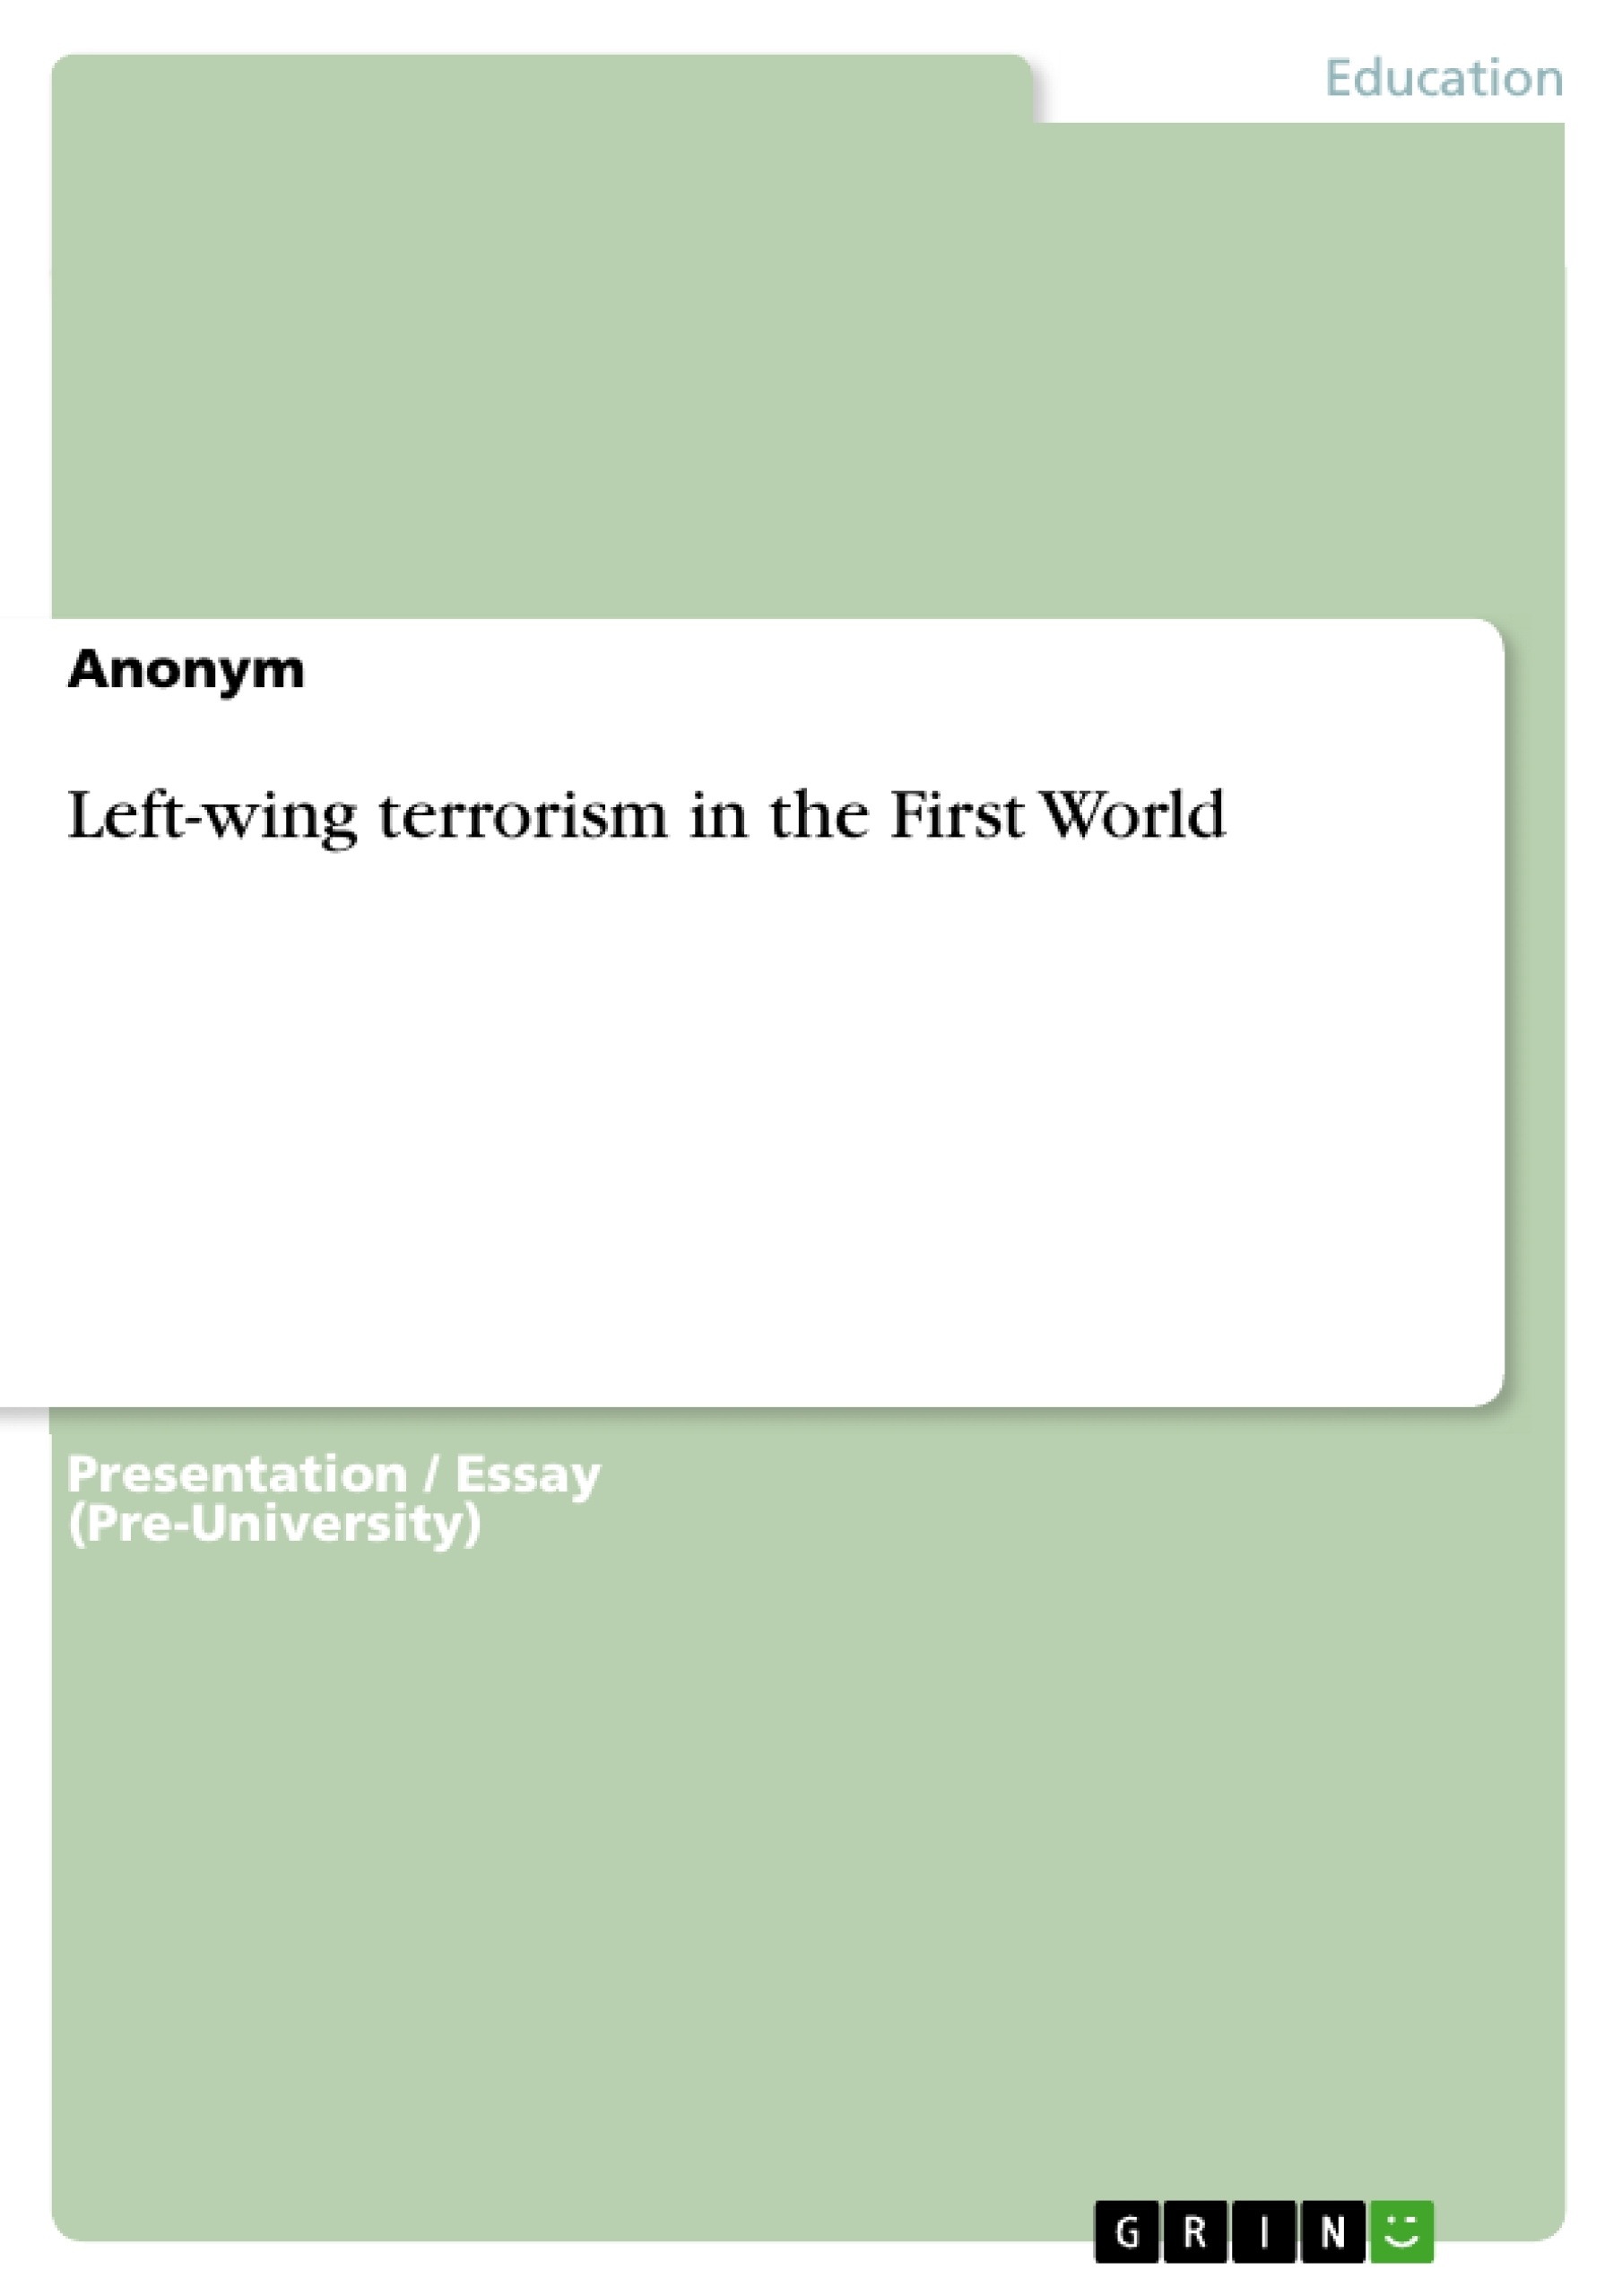 Título: Left-wing terrorism in the First World